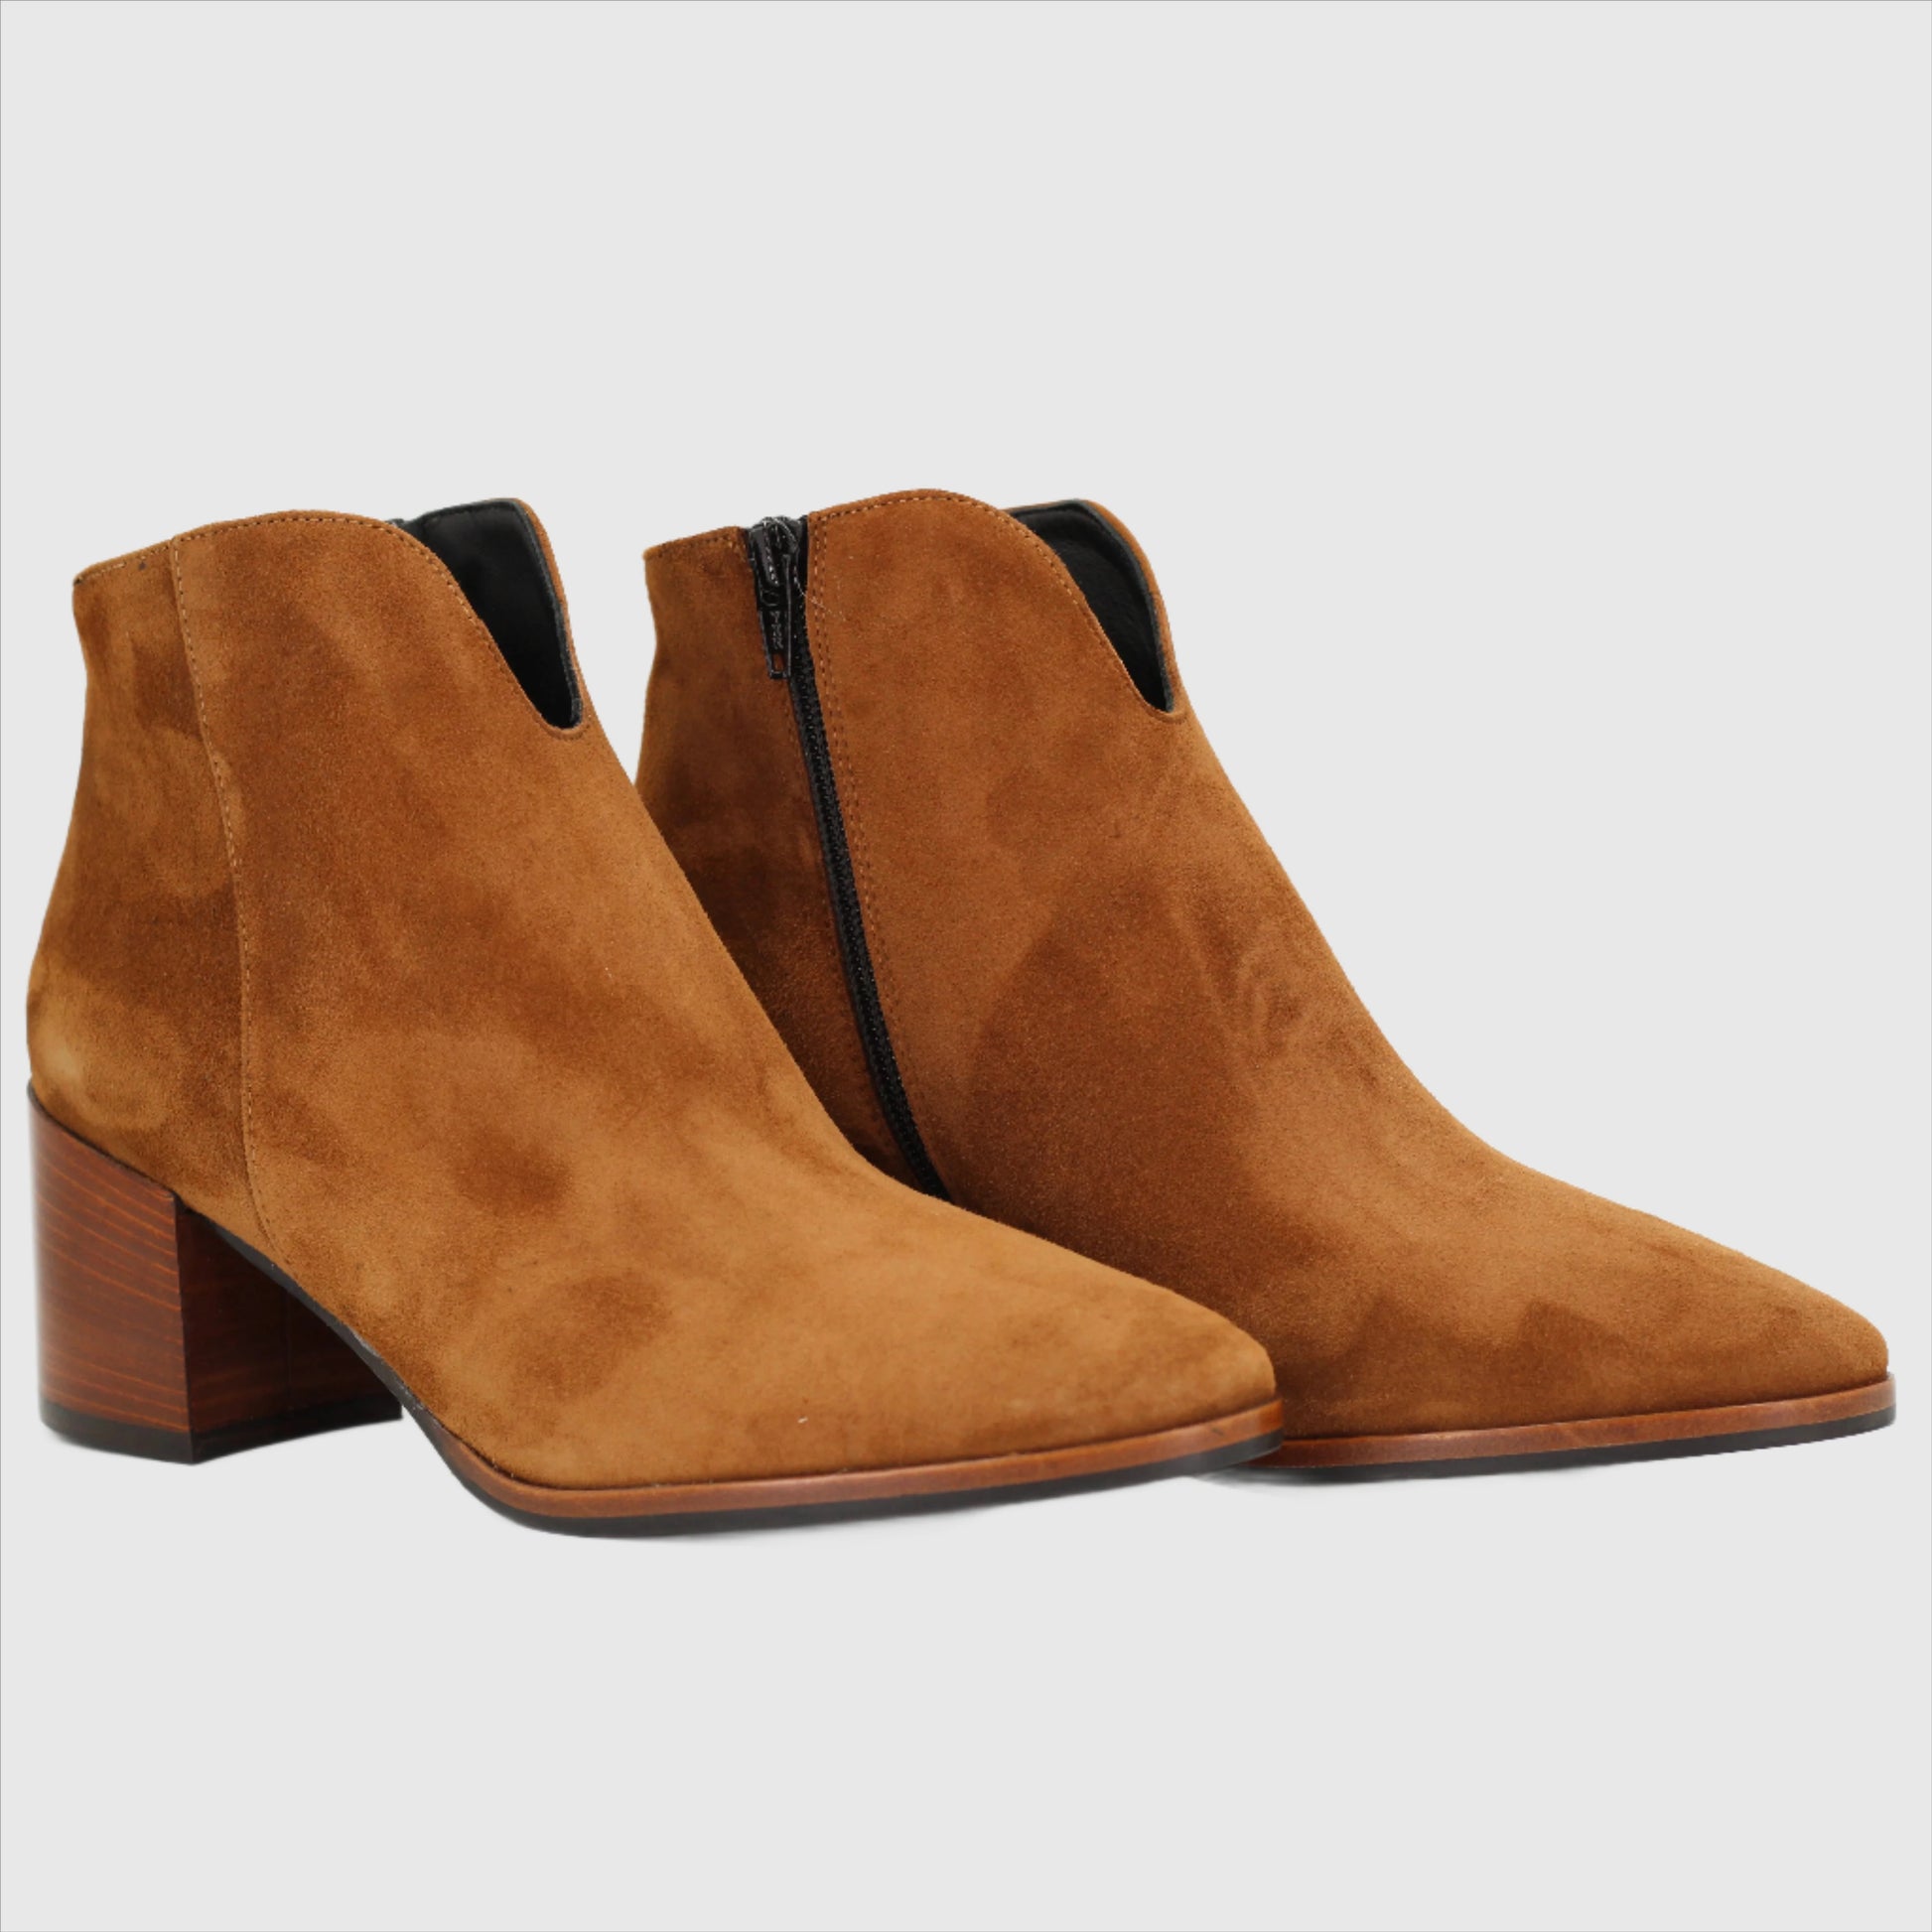 Shop Handmade Italian Leather suede ankle boot in sigaro  (GIOIA7)  or browse our range of hand-made Italian shoes in leather or suede in-store at Aliverti Cape Town, or shop online. We deliver in South Africa & offer multiple payment plans as well as accept multiple safe & secure payment methods.